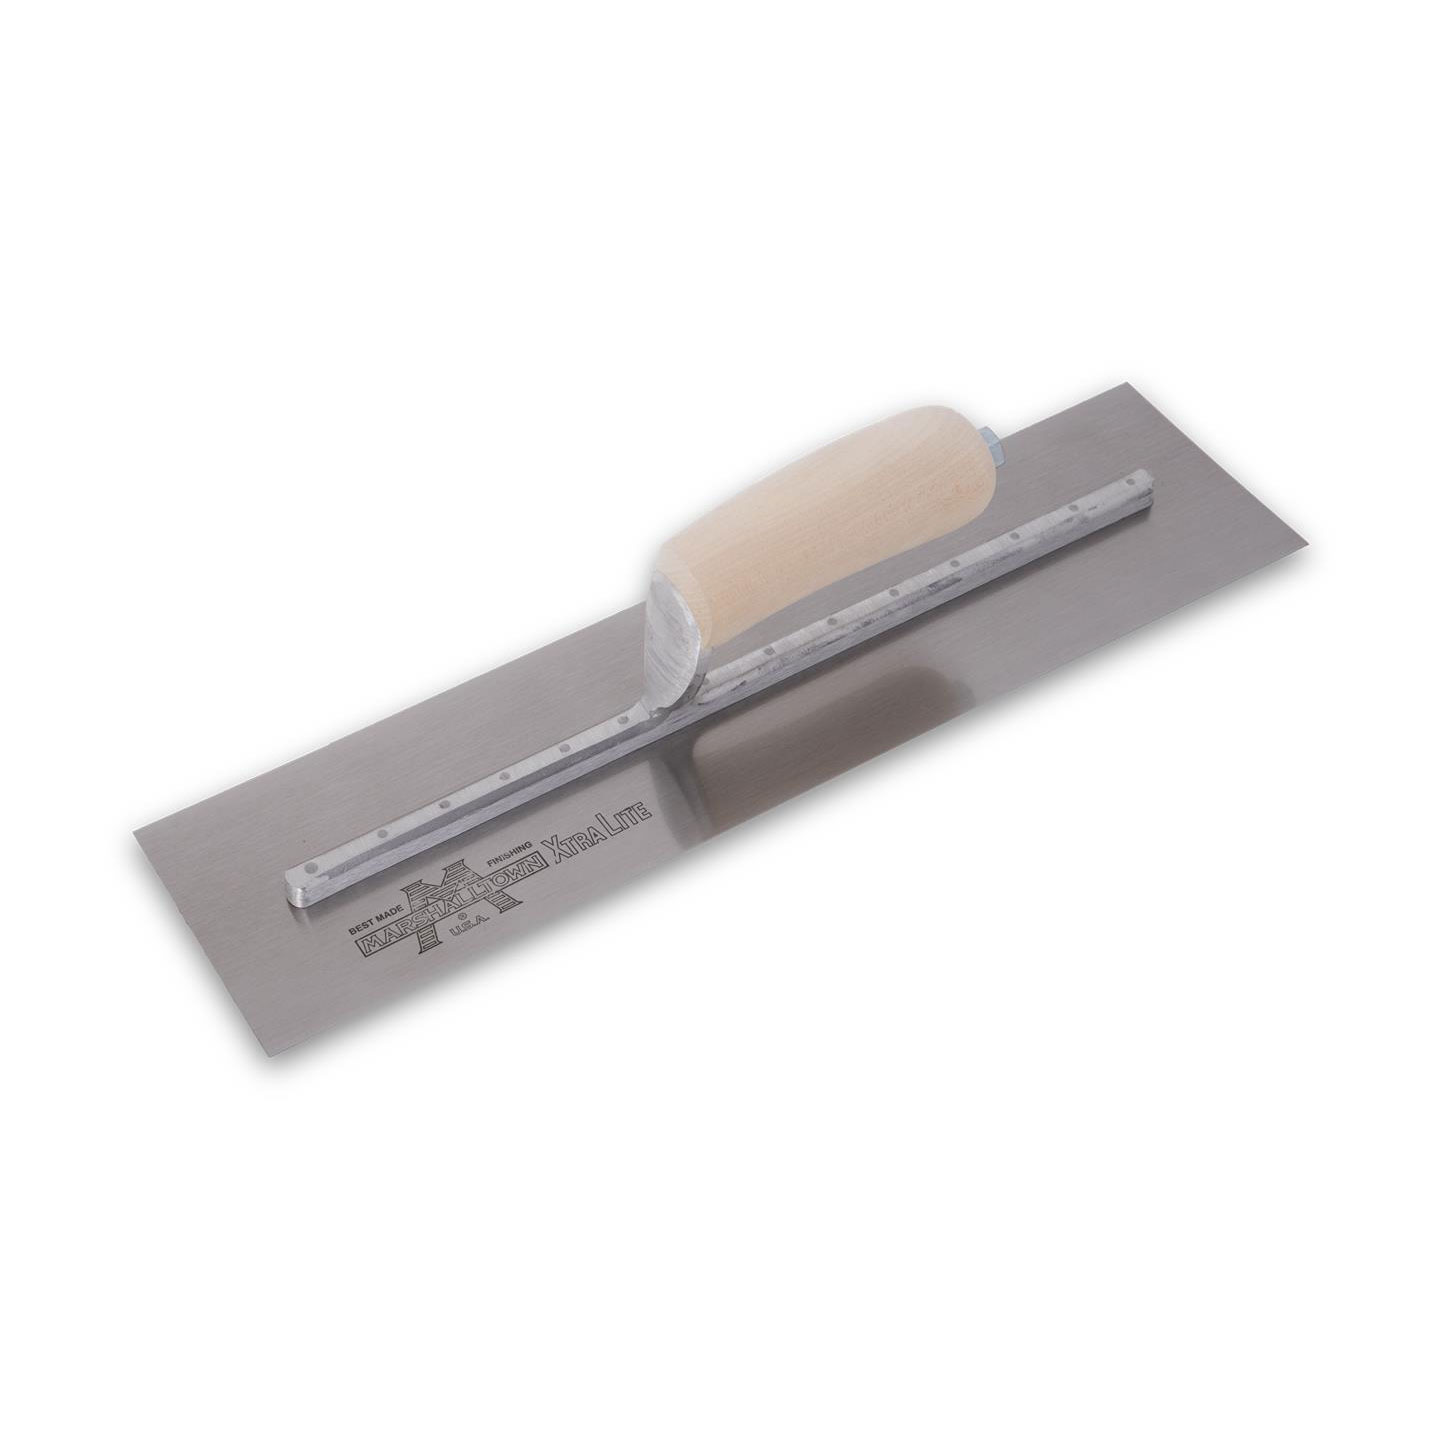 Marshalltown MXS165 16in. x 5in. High Carbon Steel Finishing Trowel with Wood MXS165